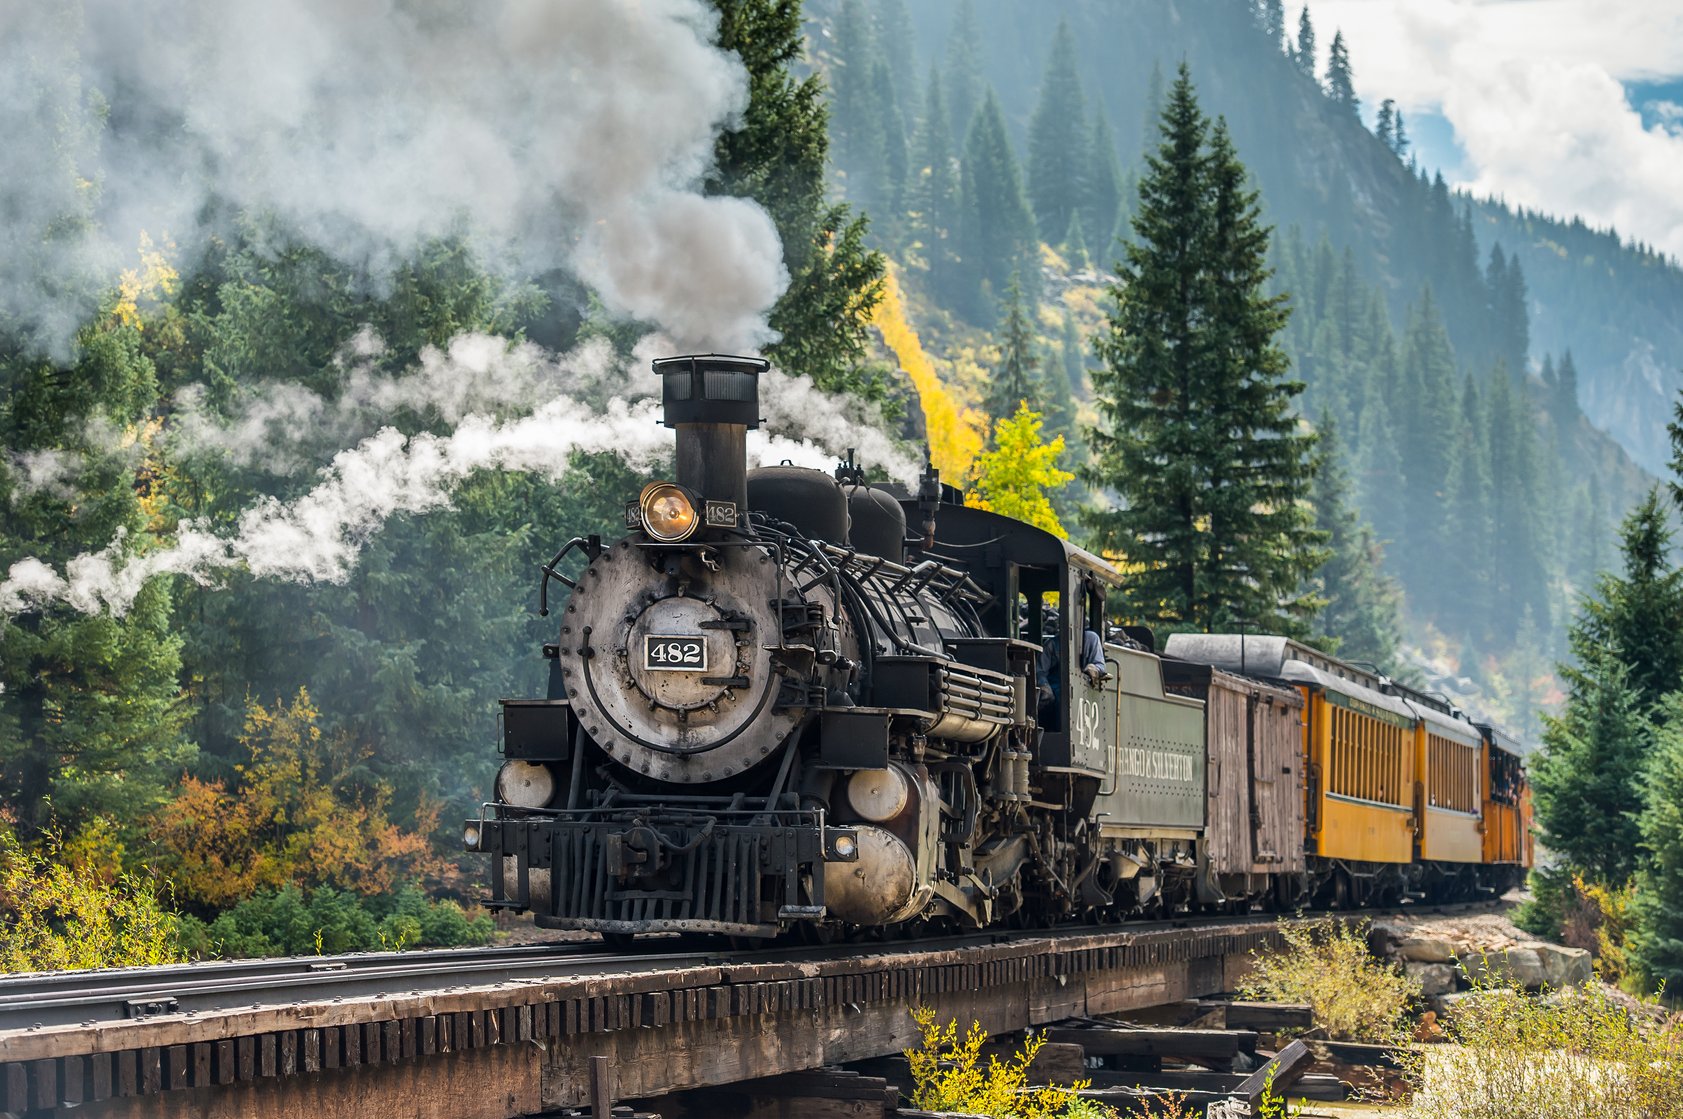 best train excursions in usa